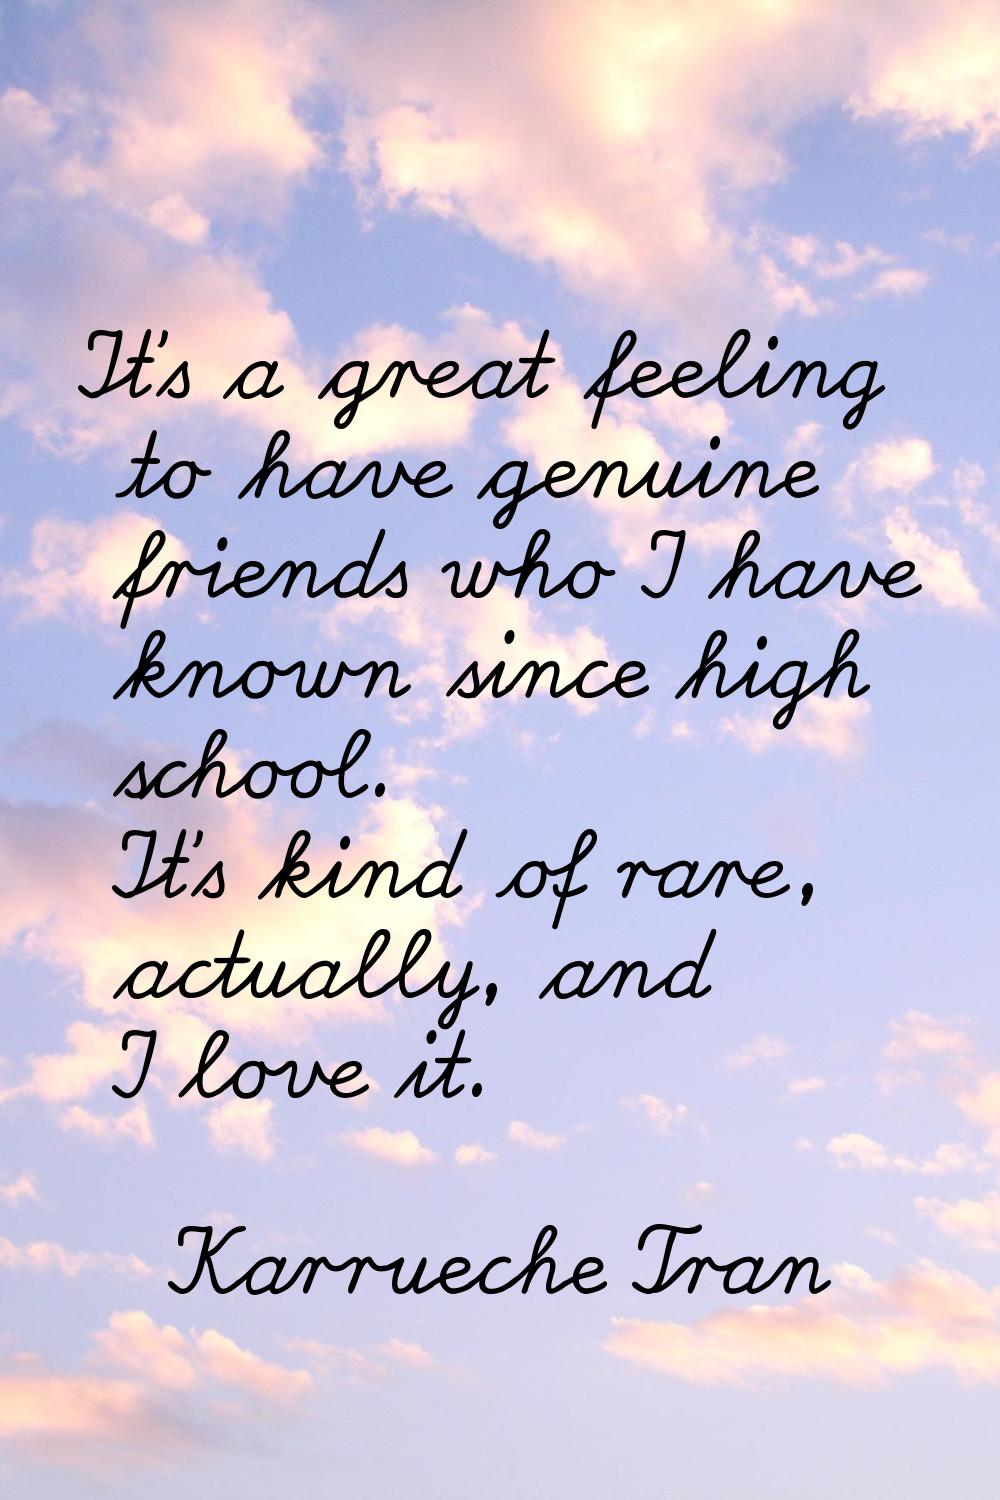 It's a great feeling to have genuine friends who I have known since high school. It's kind of rare,